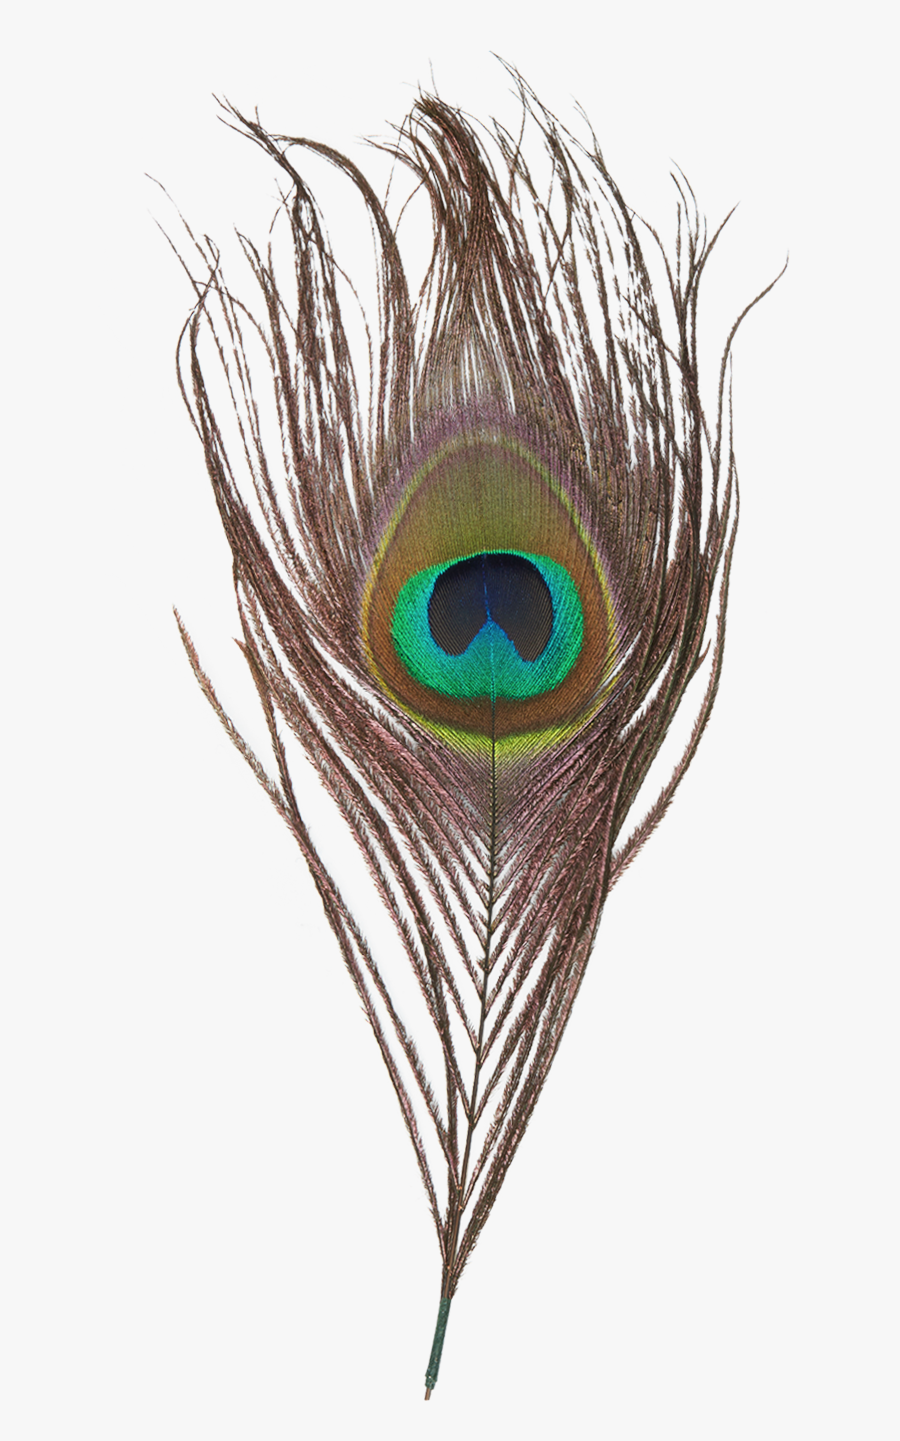 Peacock Feather Png Transparent Images - Peacock Feather Images Png, Transparent Clipart